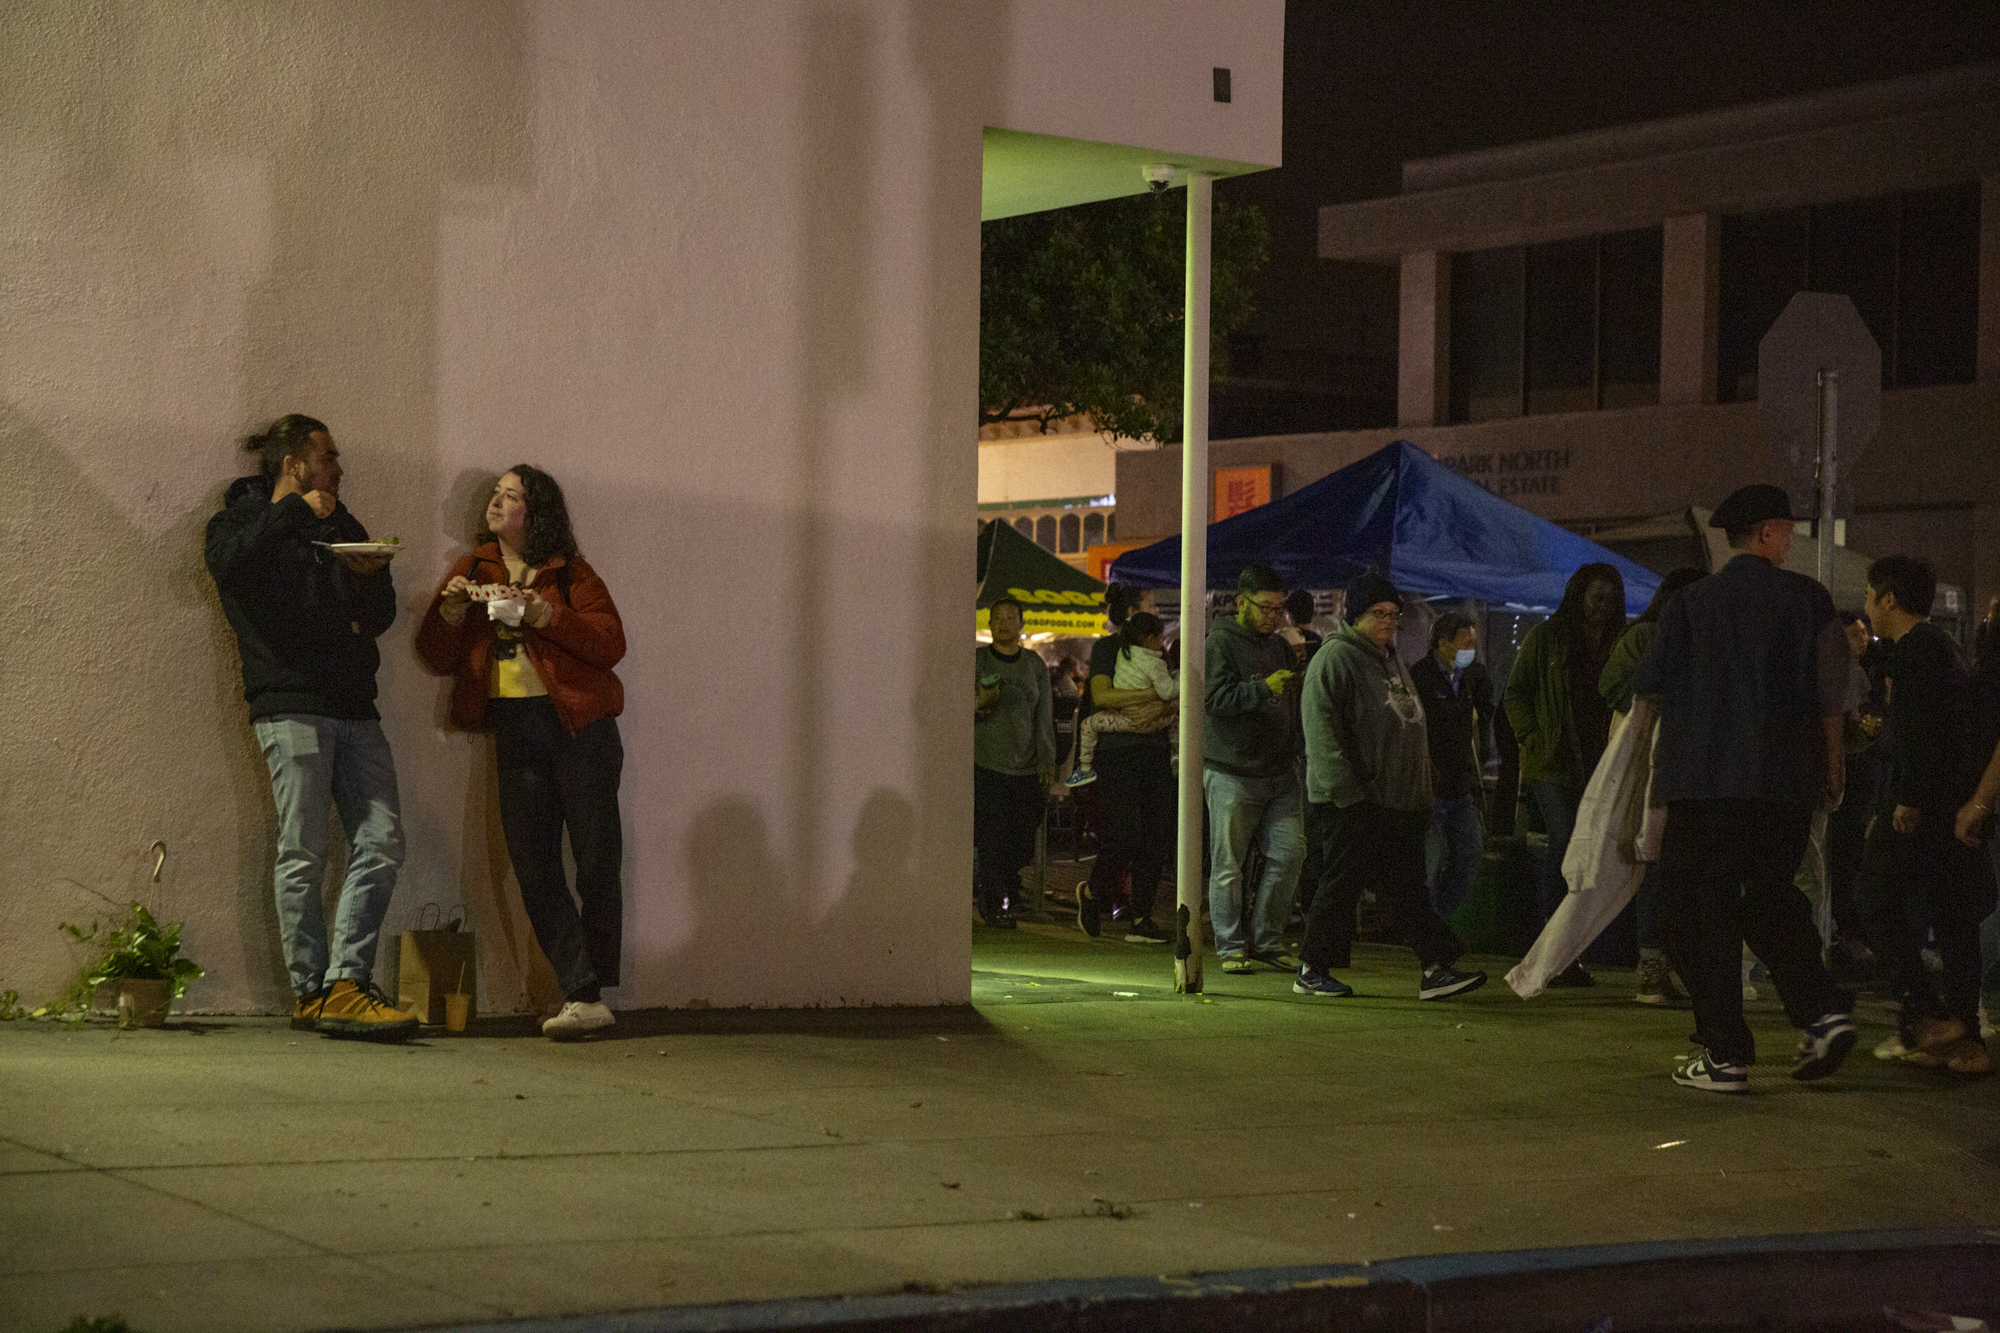 Two people lean on a wall eating while a crowd walks by.